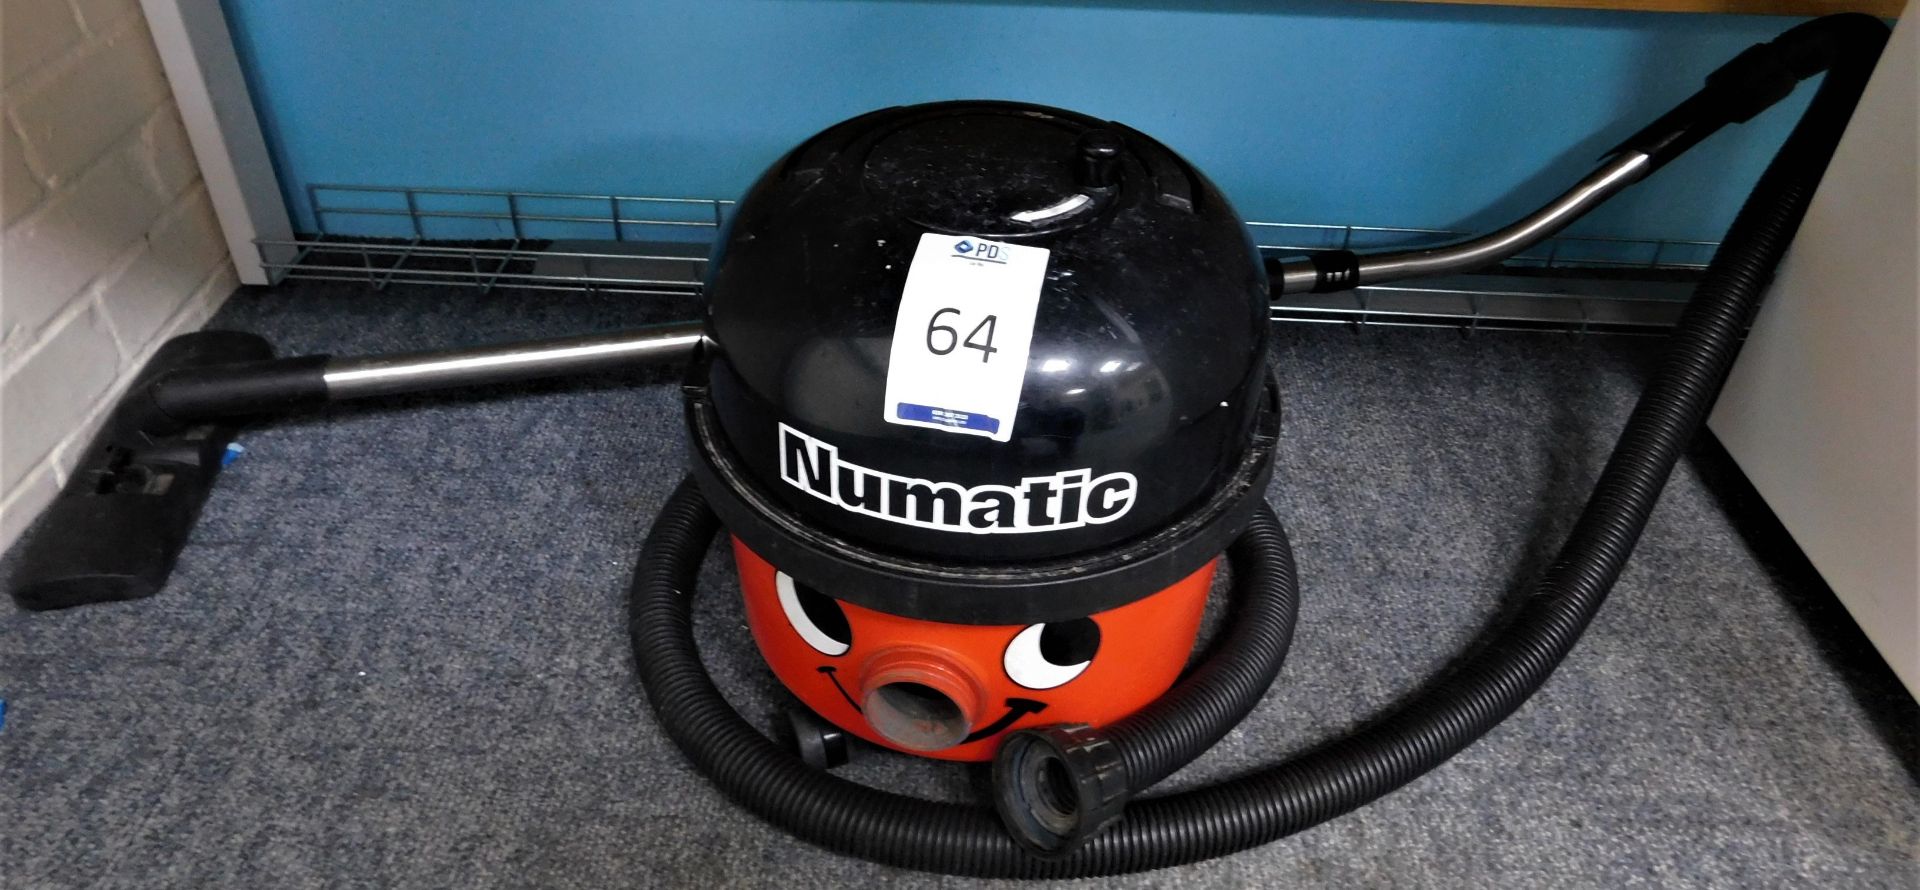 Henry Nu-Matic Cylinder Vacuum (Location: Hatfield - See General Notes for More Details)